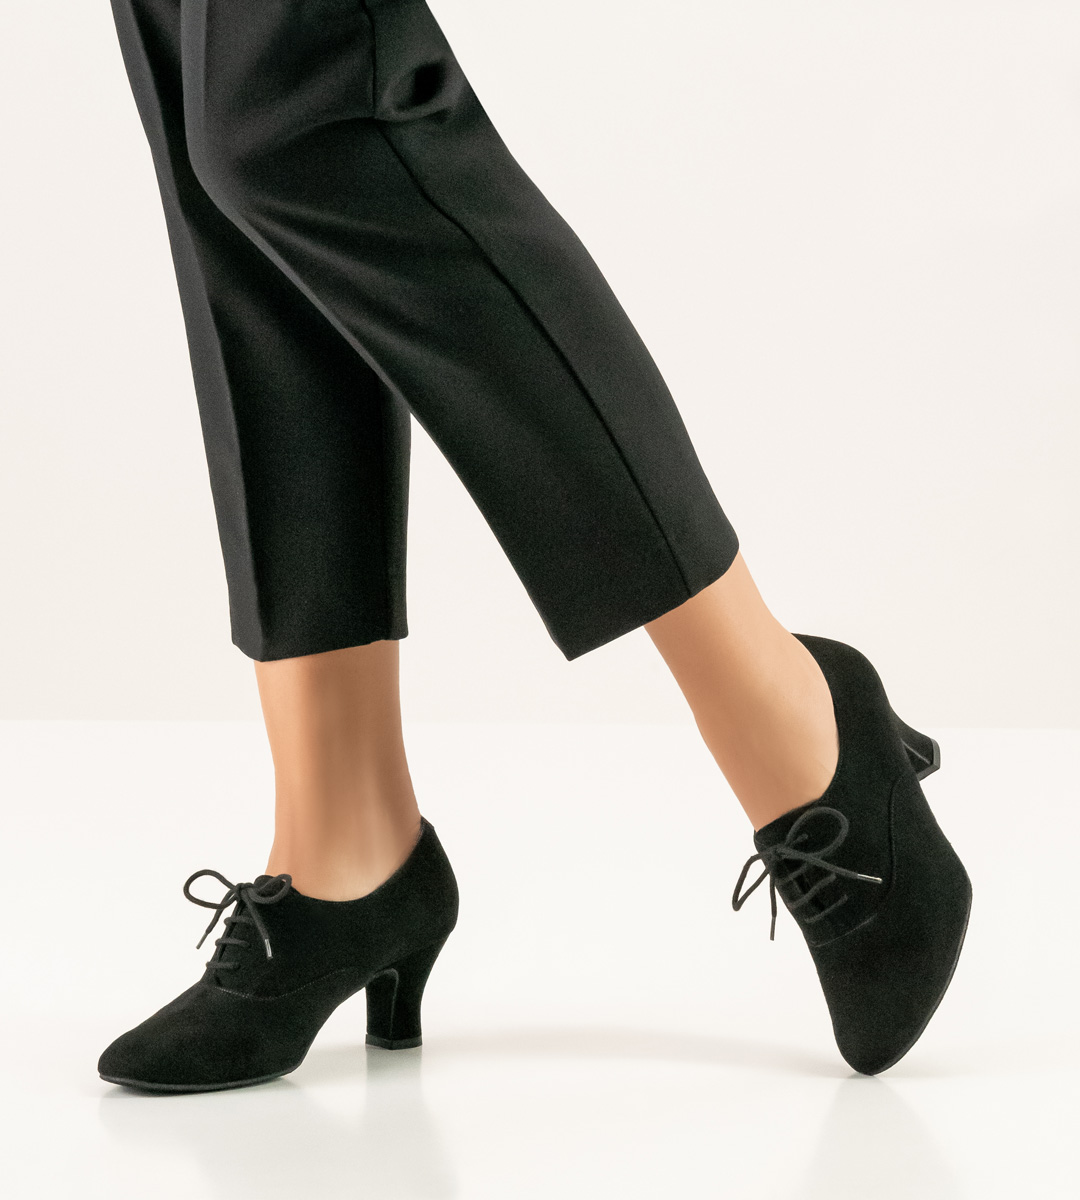 Werner Kern ladies' dance shoe in black velour combined with black trousers